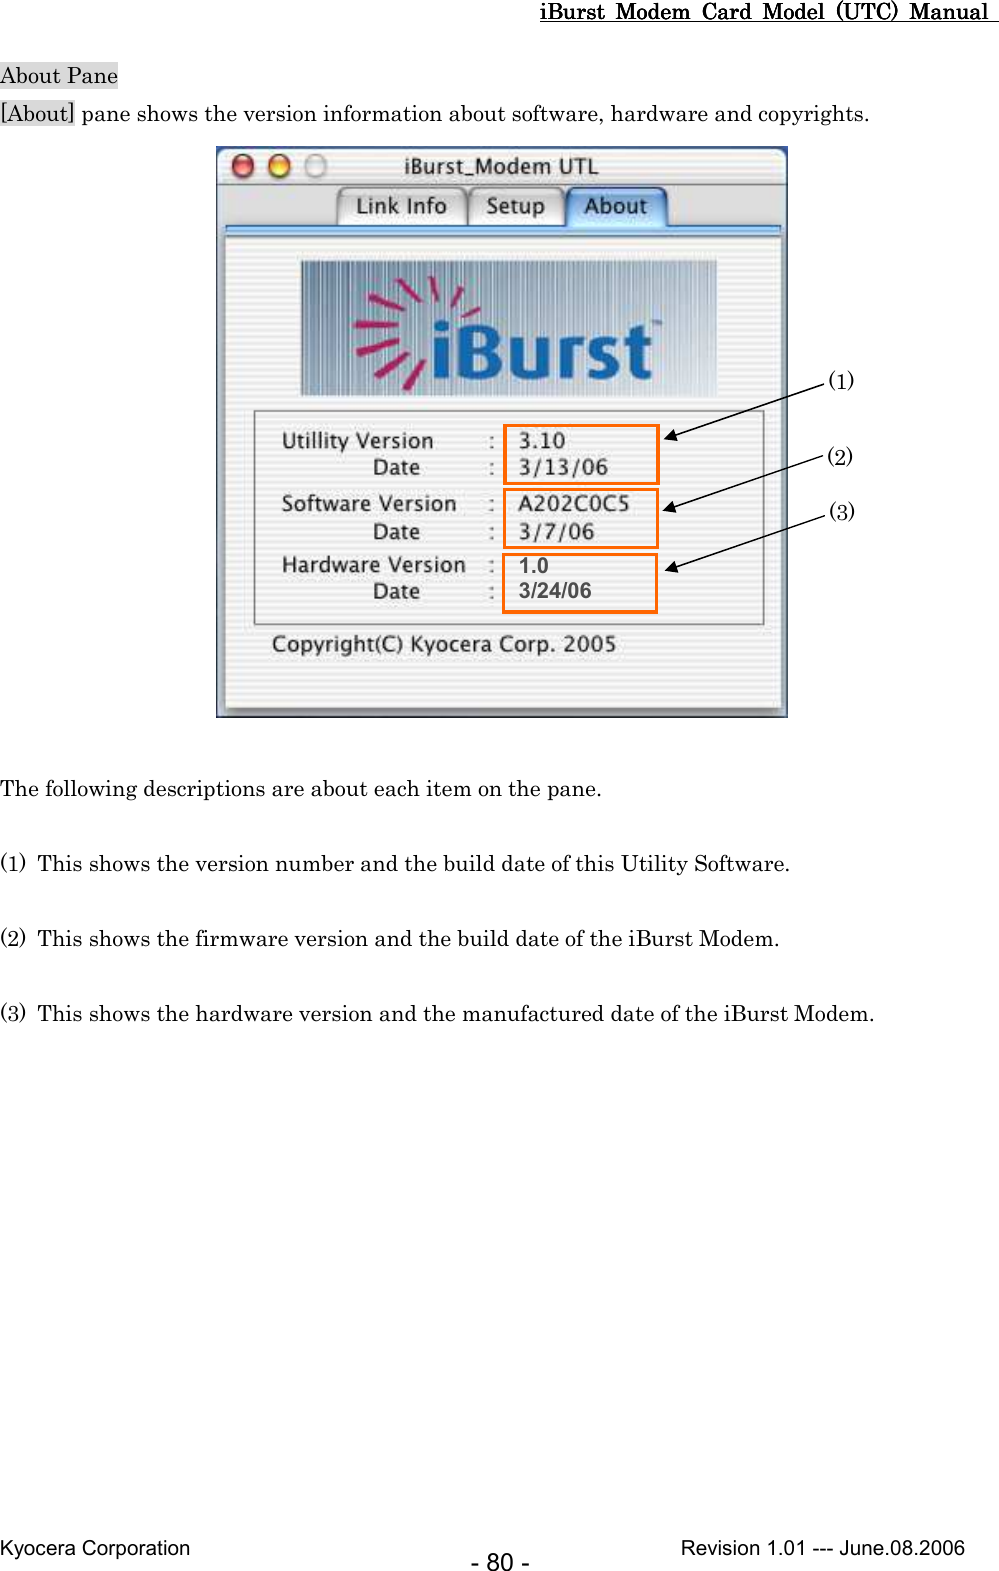 iBurst  Modem  Card  Model  (UTC)  Manual iBurst  Modem  Card  Model  (UTC)  Manual iBurst  Modem  Card  Model  (UTC)  Manual iBurst  Modem  Card  Model  (UTC)  Manual       Kyocera Corporation                                                                                              Revision 1.01 --- June.08.2006 - 80 - About Pane [About] pane shows the version information about software, hardware and copyrights.   The following descriptions are about each item on the pane.  (1) This shows the version number and the build date of this Utility Software.  (2) This shows the firmware version and the build date of the iBurst Modem.  (3) This shows the hardware version and the manufactured date of the iBurst Modem.  1.0 3/24/06 (1) (2) (3) 